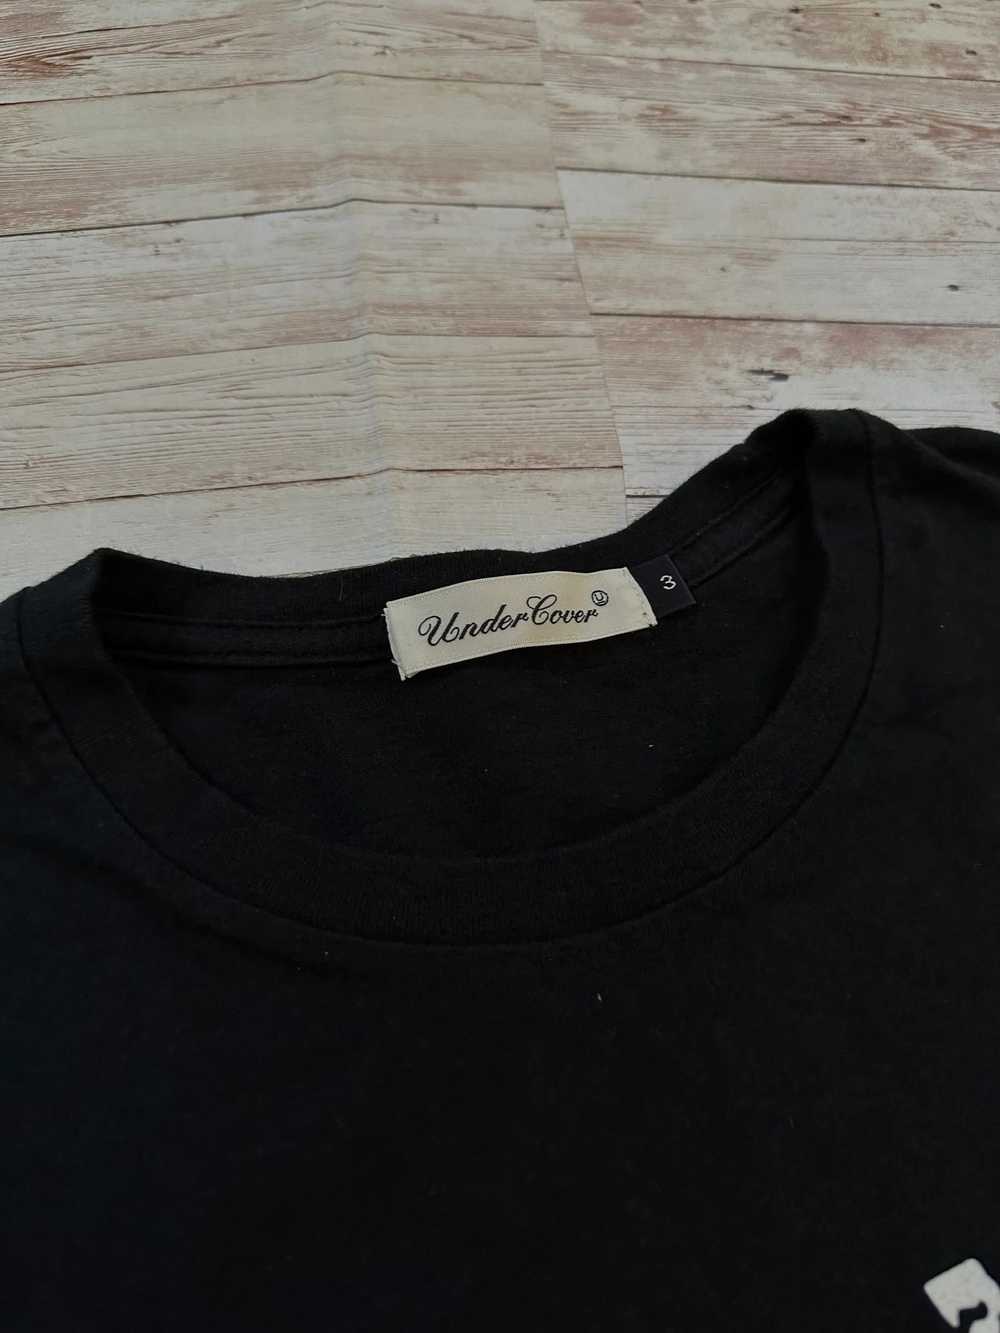 Undercover SS15 Marquee Moon Prove It Tee - image 2